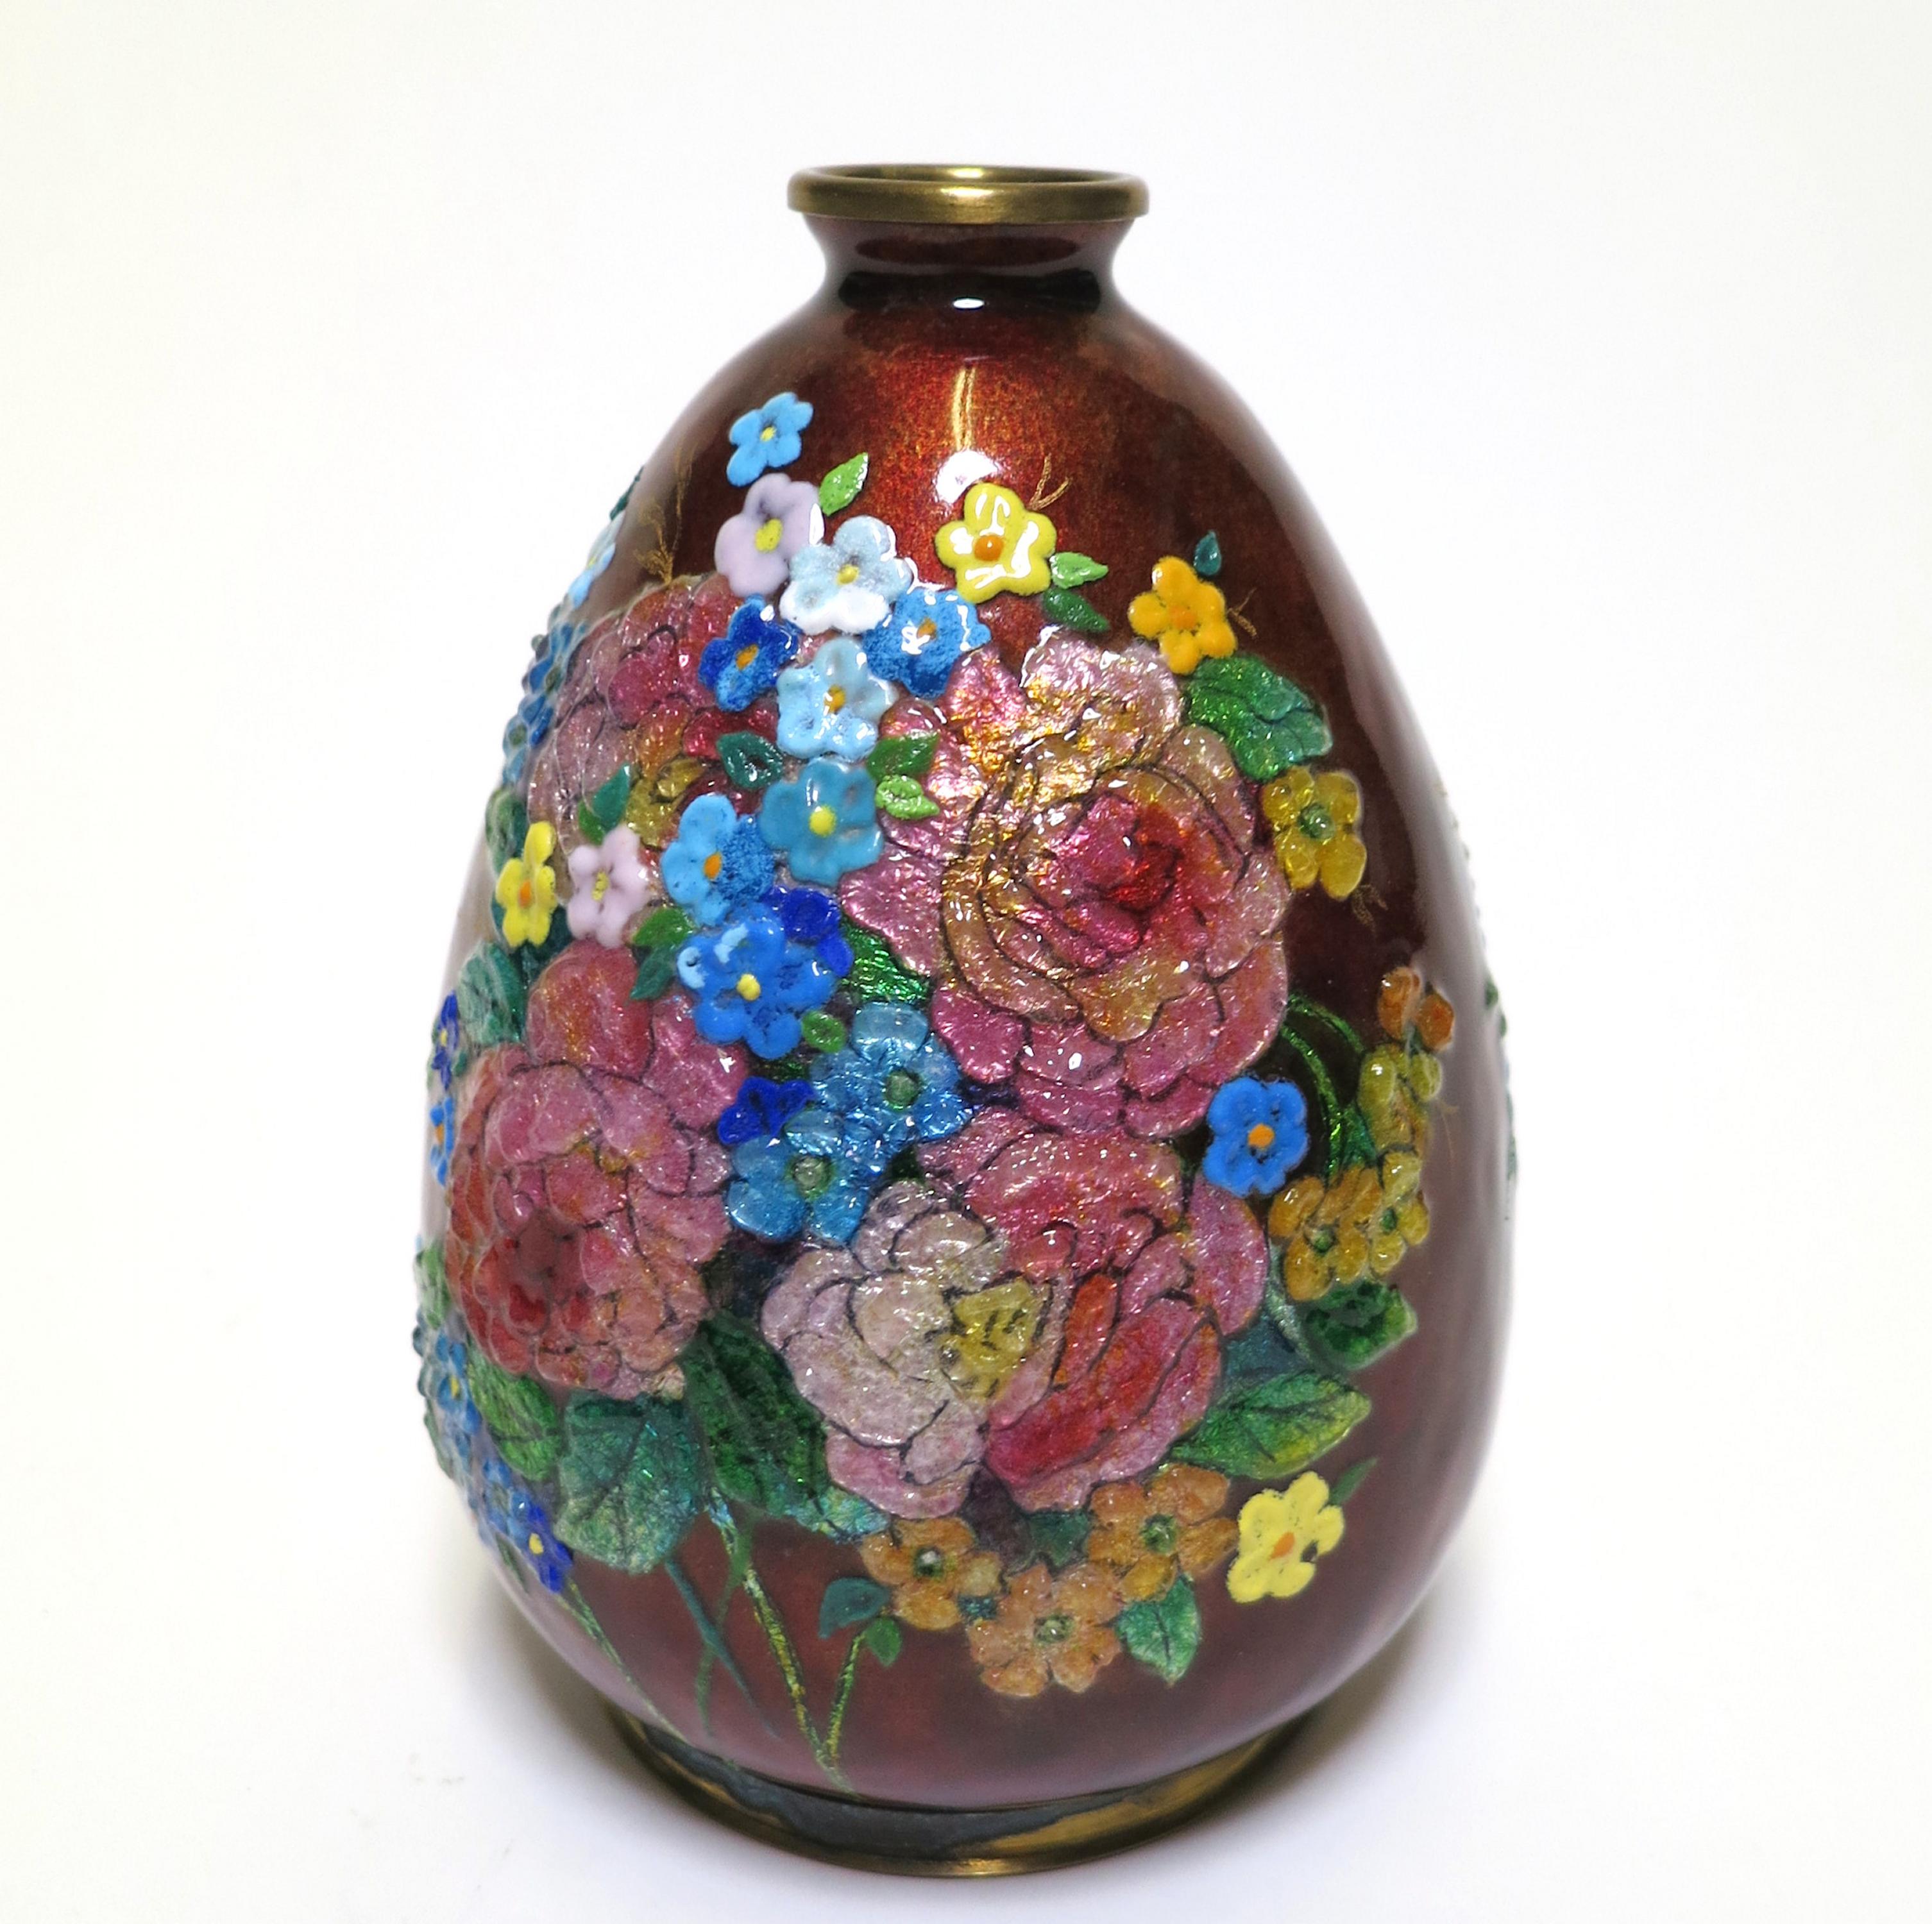 Small Vase with Flower Bouquets - Image 2 of 12